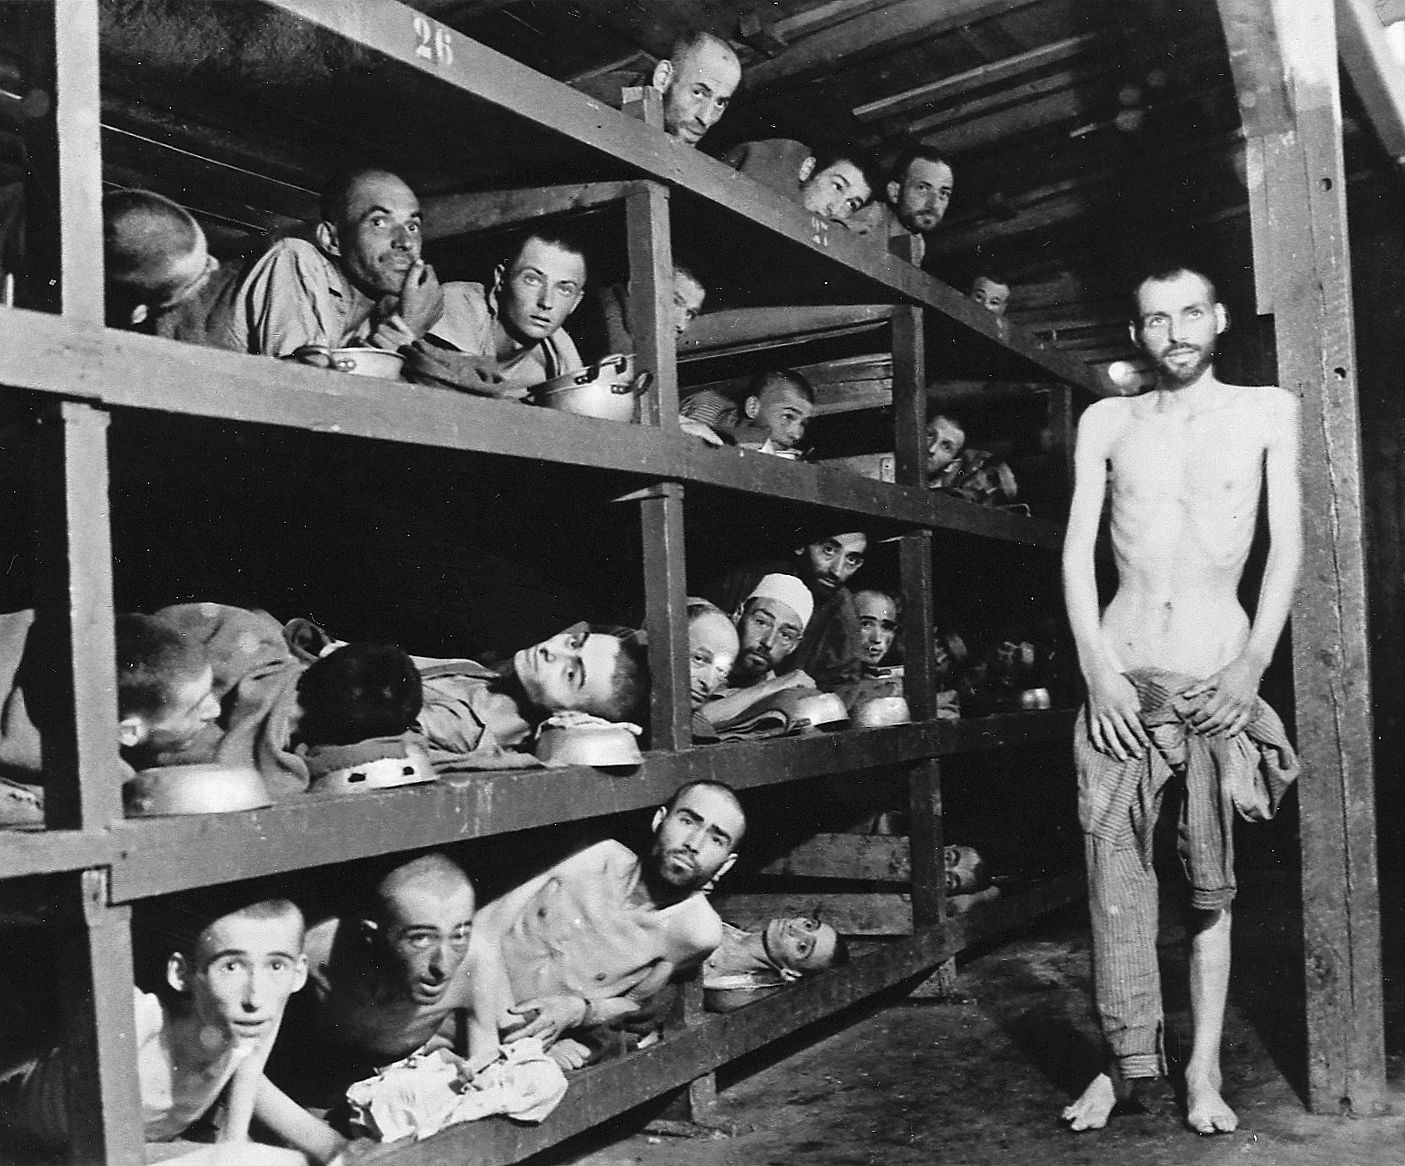 This interior view of a barracks at Buchenwald reveals the stifling confines of the sleeping area. Some of the prisoners use their food bowls as pillows. Disease spread rapidly in such close quarters and accounted for many deaths. (National Archives)